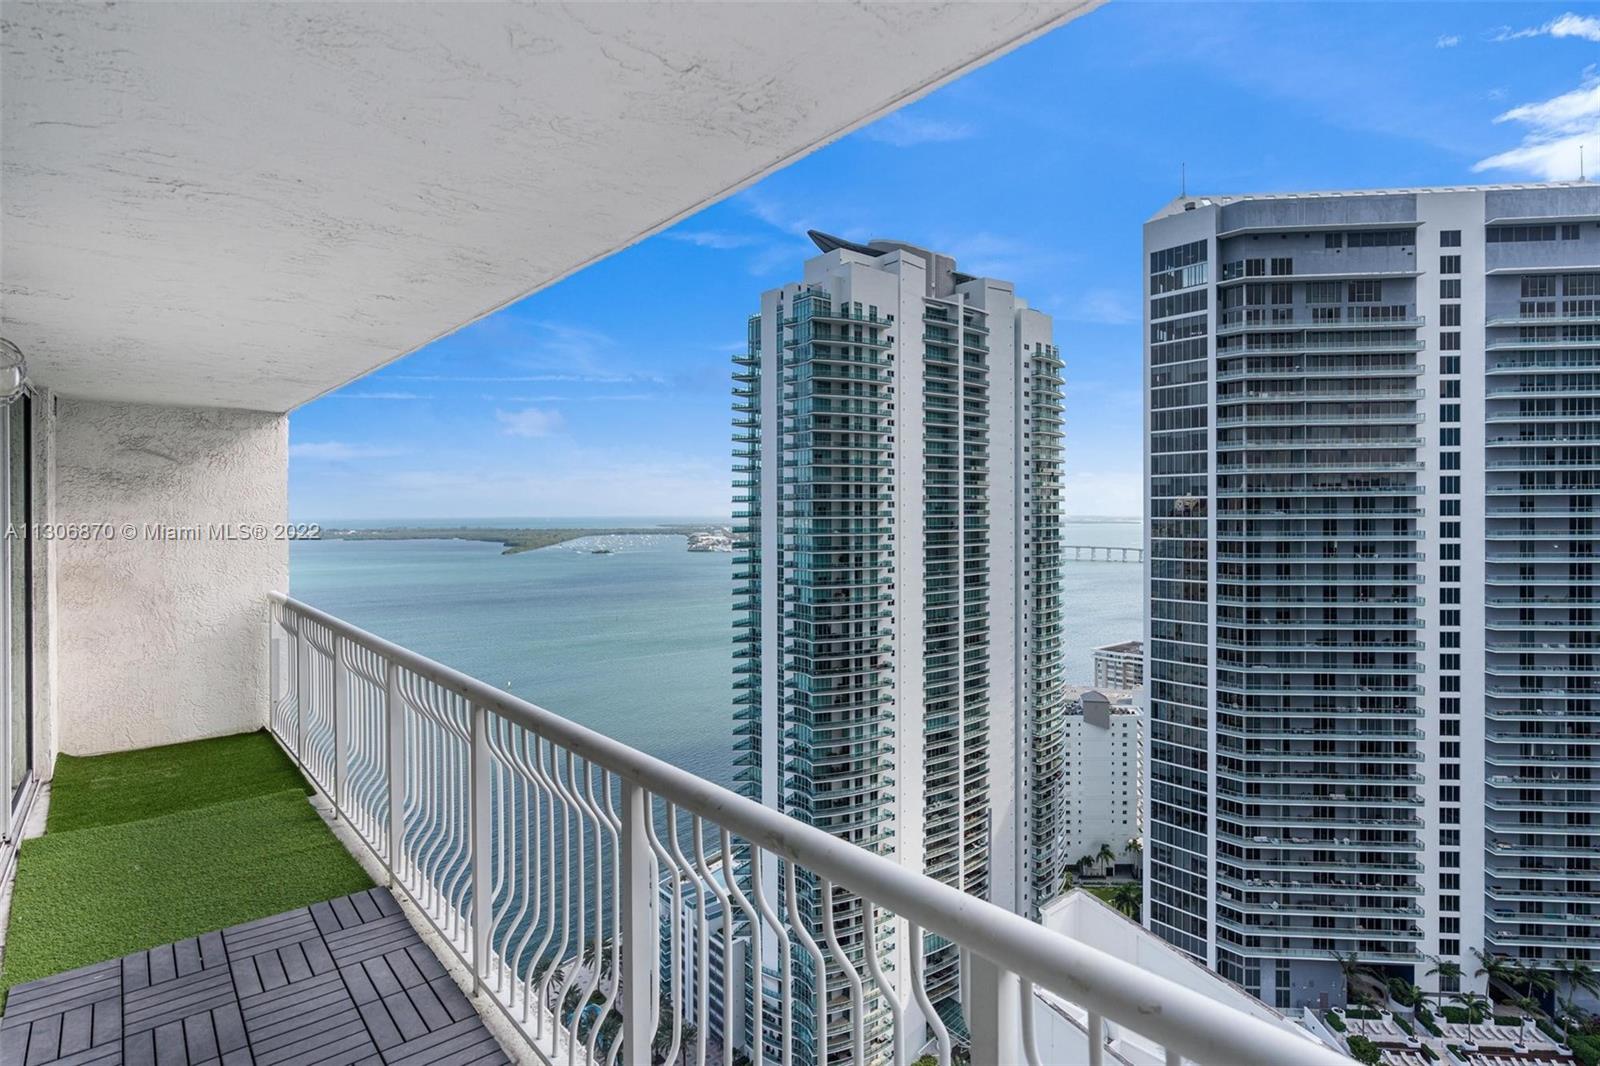 Photo 2 of The Club At Brickell Bay in Miami - MLS A11306870